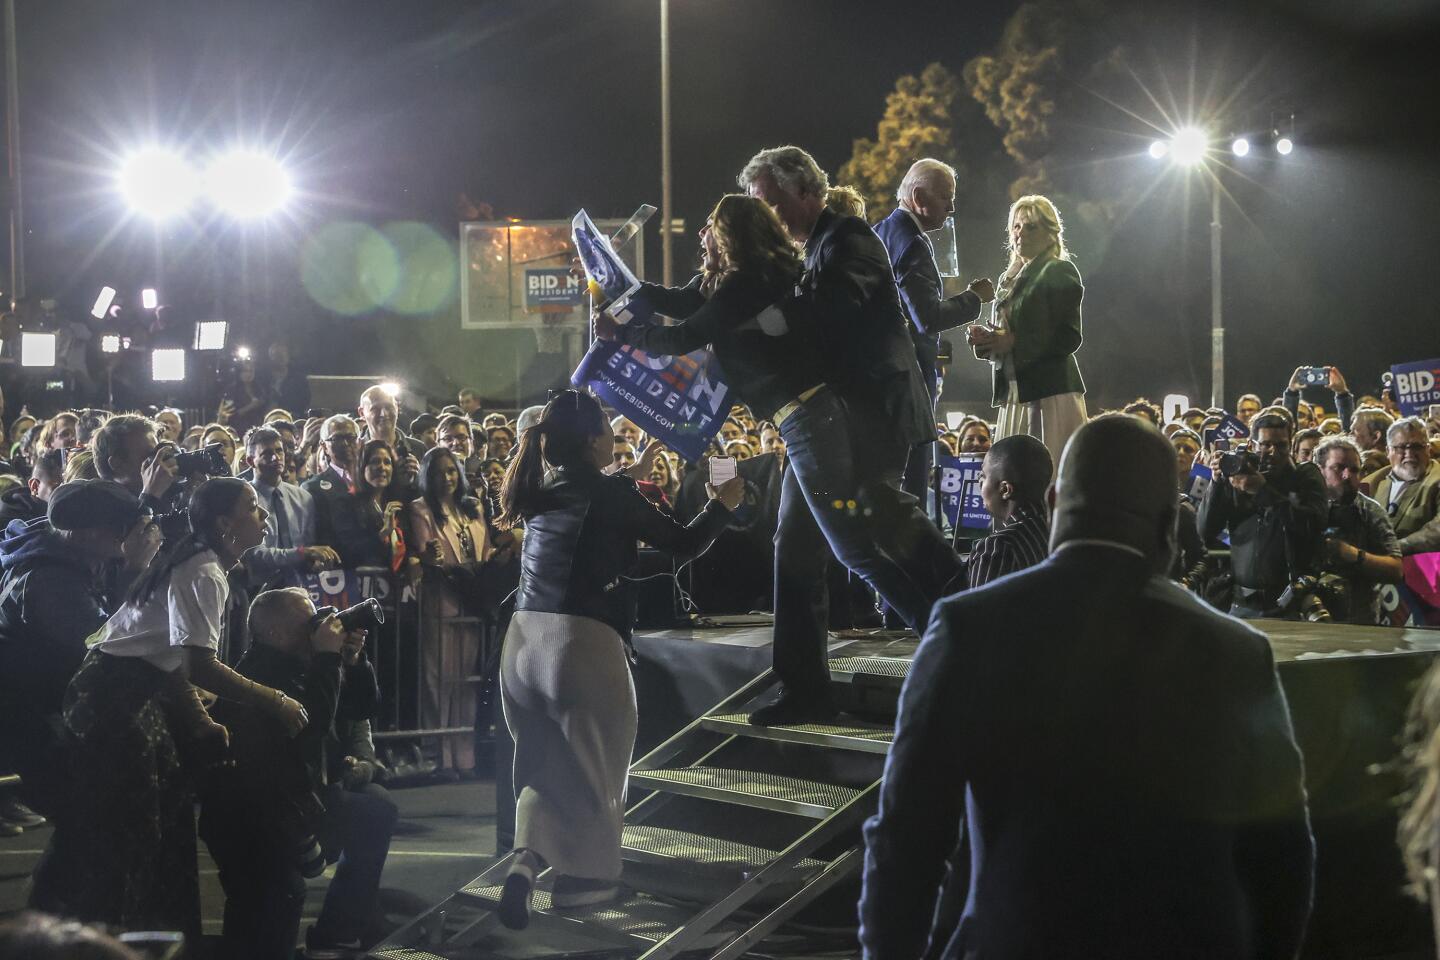 A protester is pulled off the stage at Biden rally.